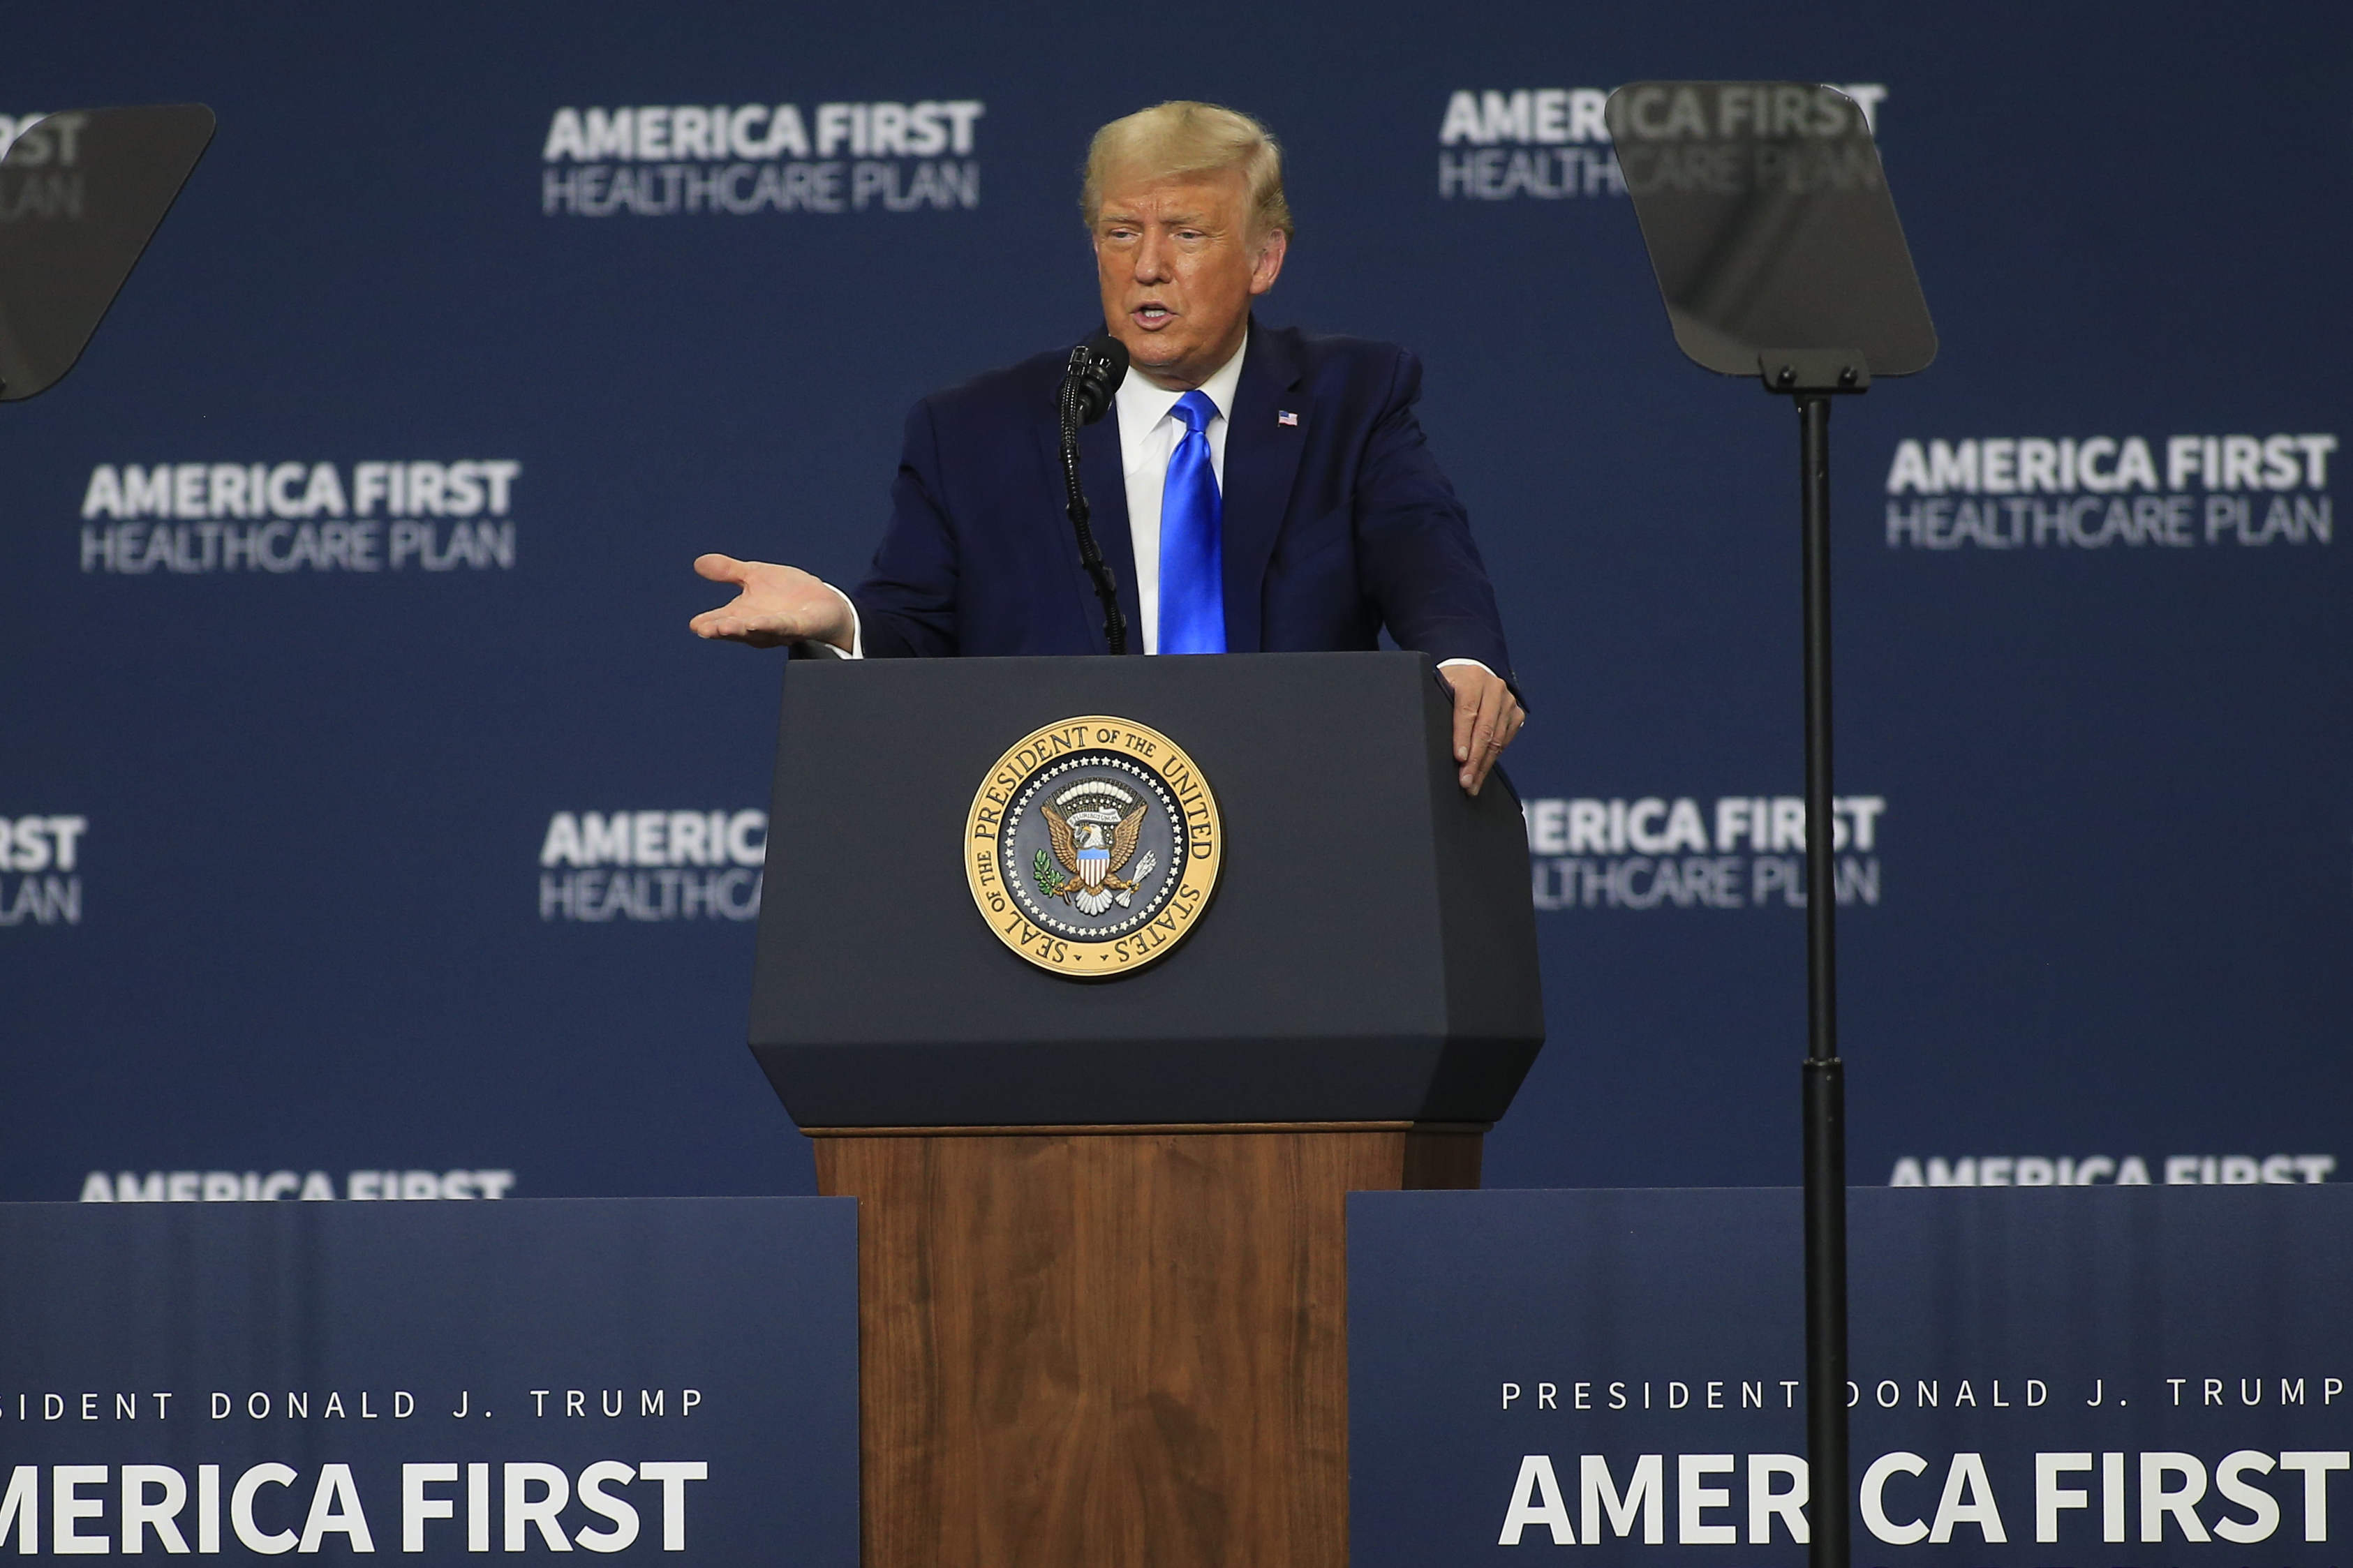 President Donald Trump delivers a speech about health care on Sept. 24, 2020 in Charlotte, North Carolina, less than six weeks before the November election.